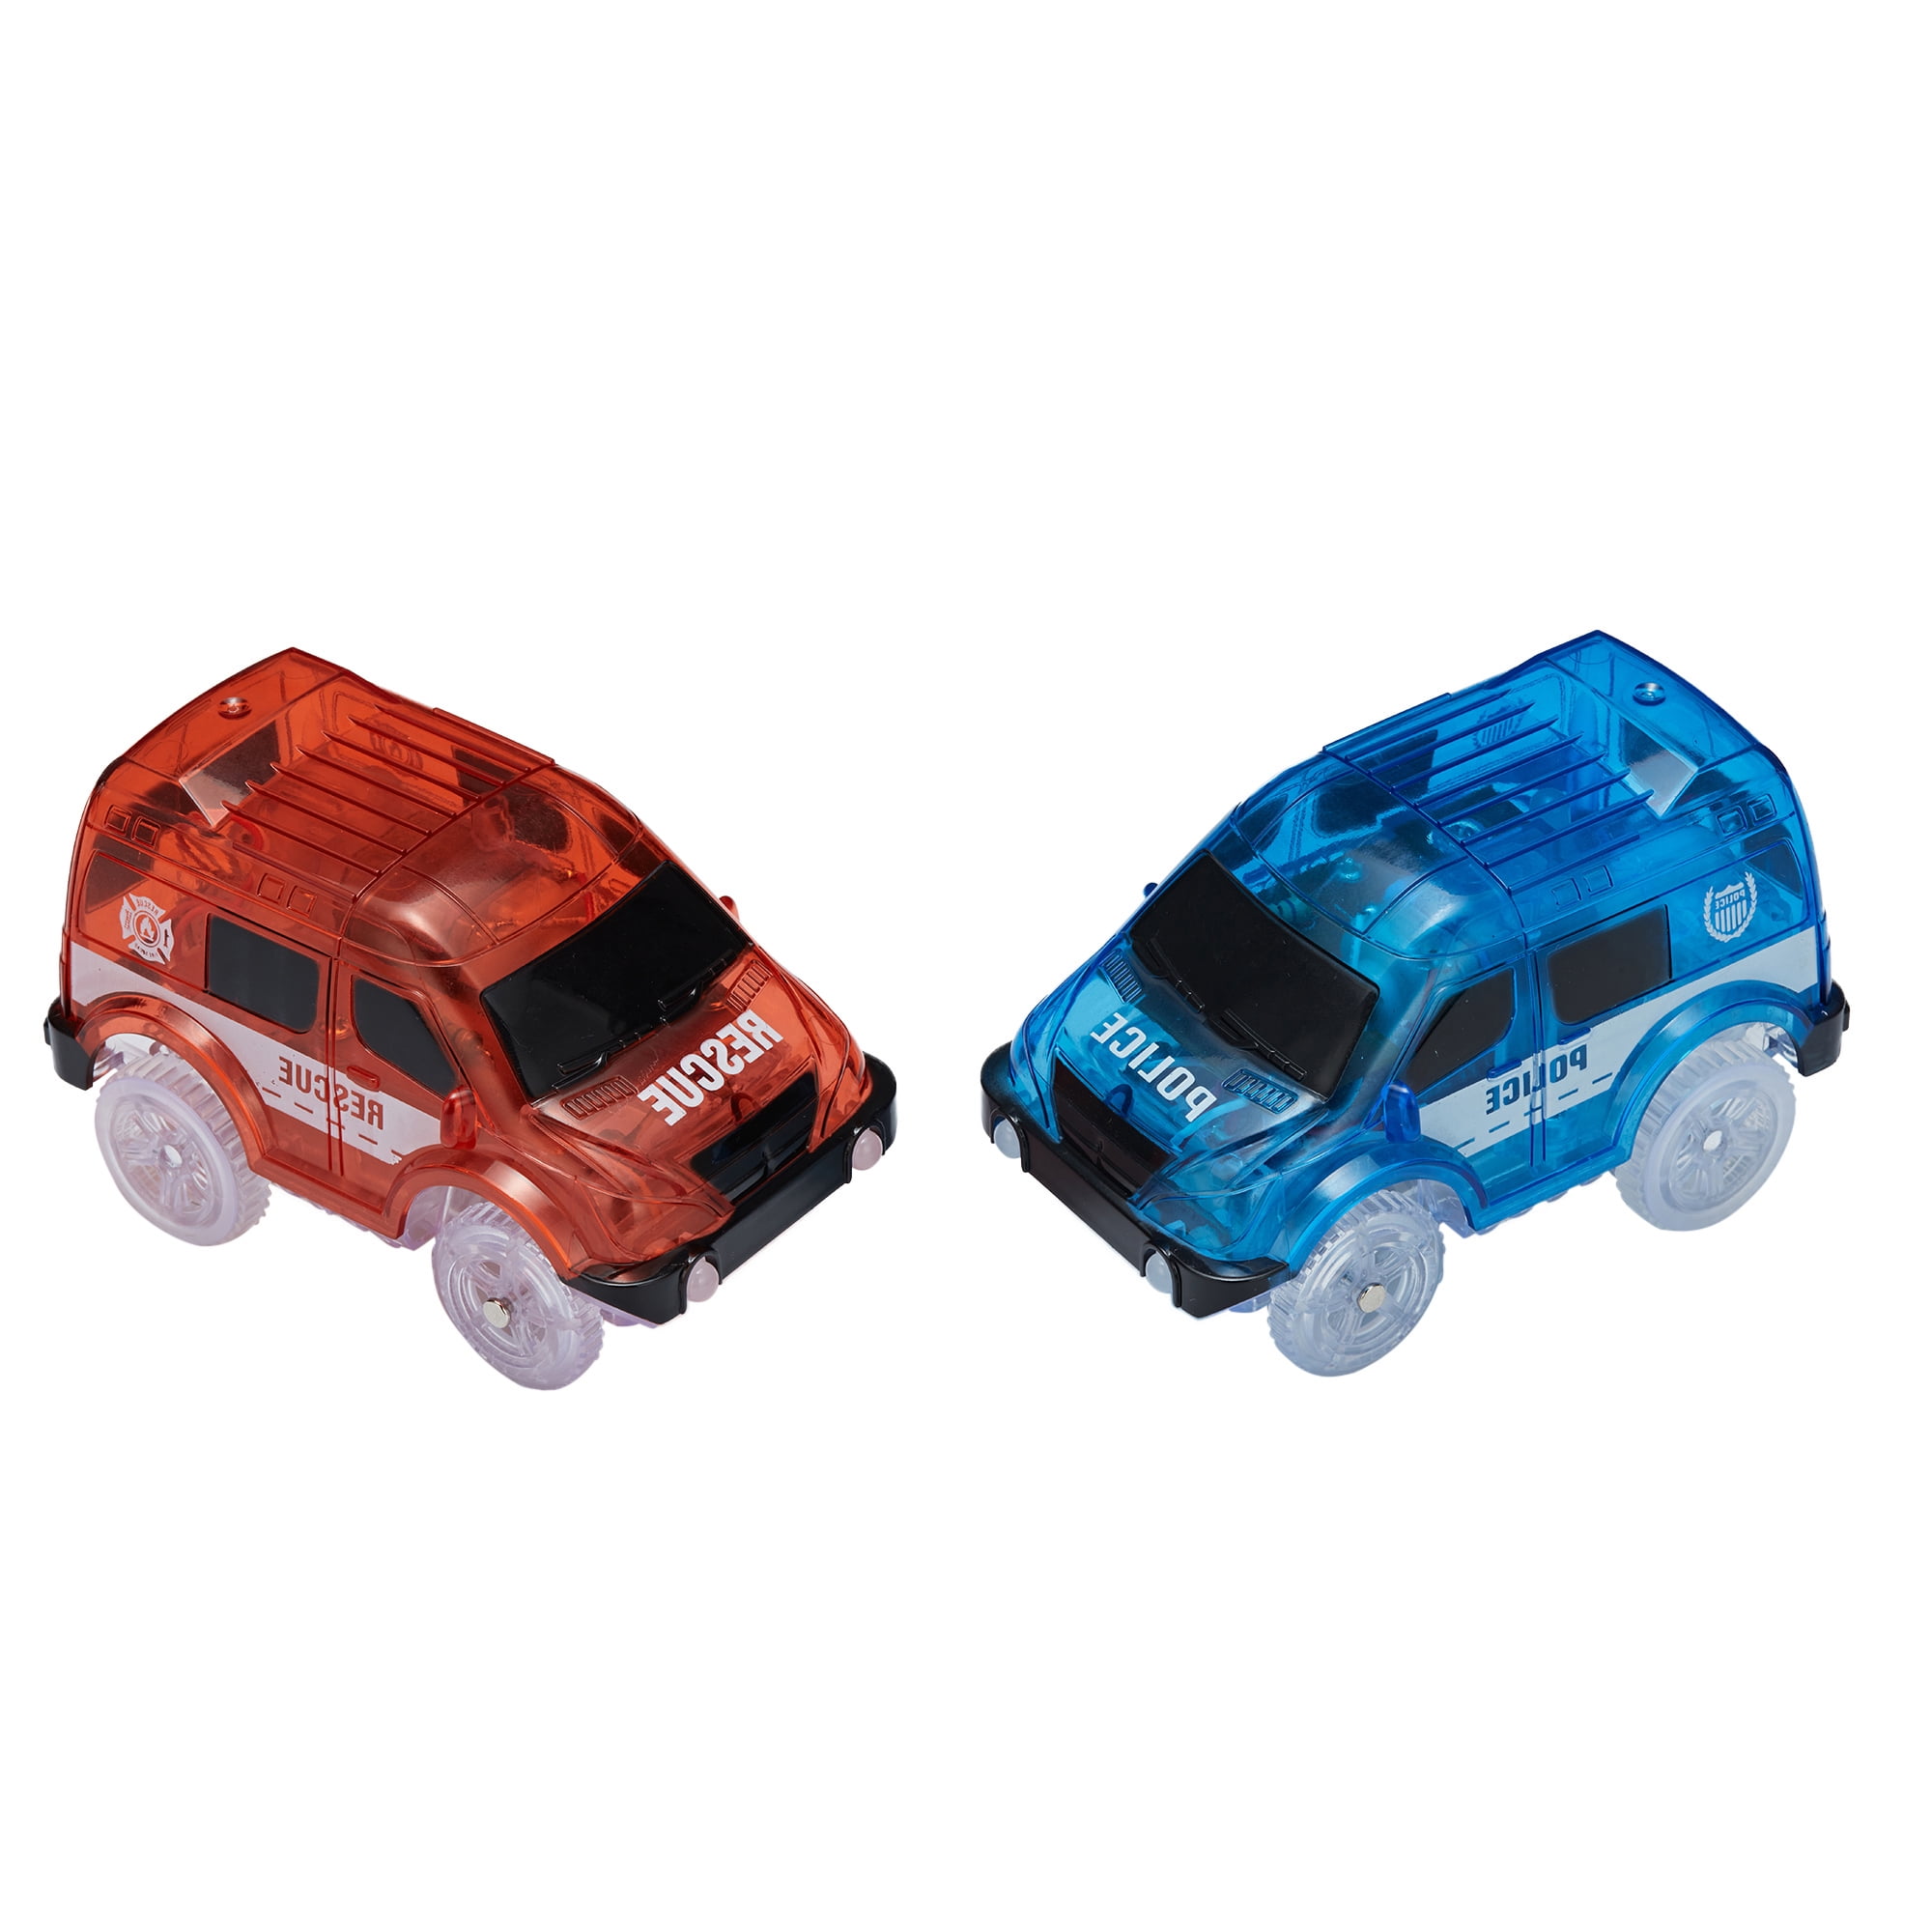 Toy Cars Xmas Birthday Gifts for 3 4 5 6 7 8 Years Old Toddlers Kids Boys Girls Party Favors Racing Model Car Sets Glow in The Dark 2 Pack Electric Race Car Toys with Flashing Lights Engine Sounds 